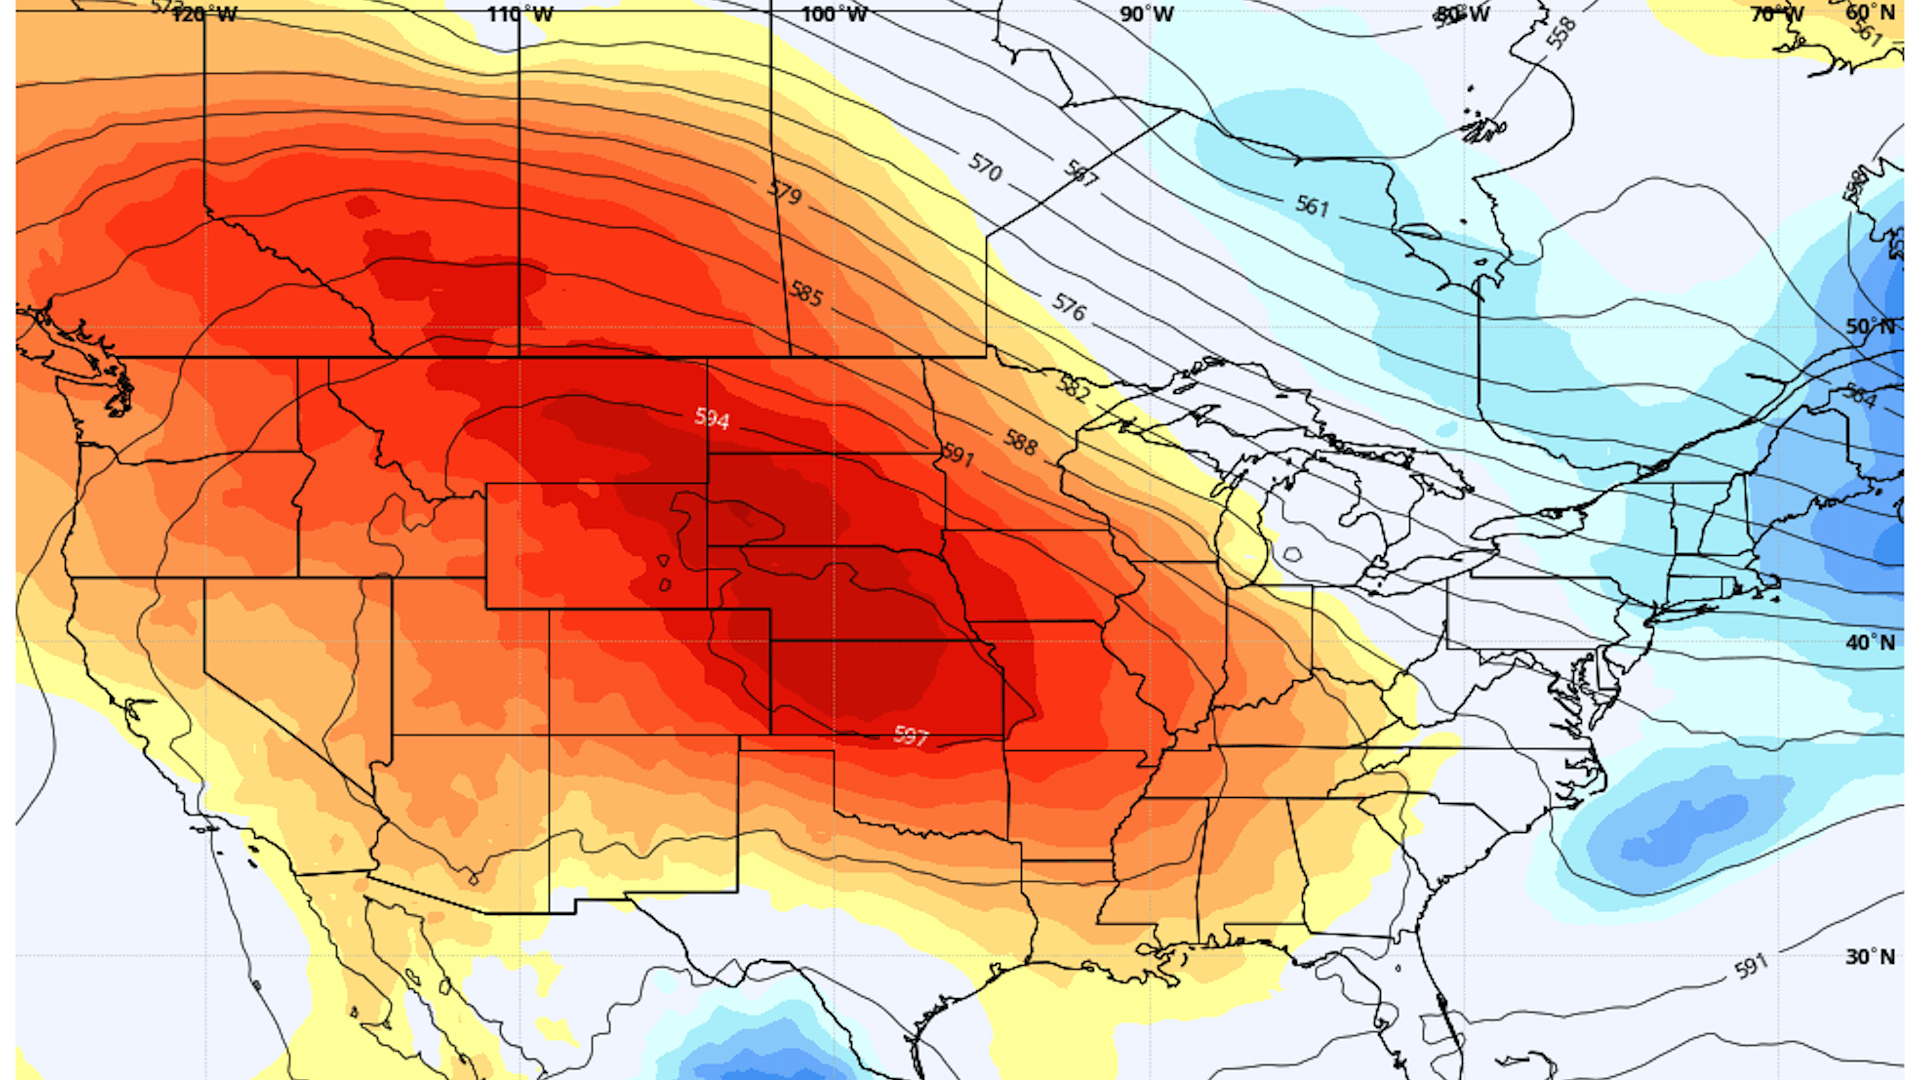 Weather map showing red colors indicating where the hottest weather will be in late July 2021 across the U.S.